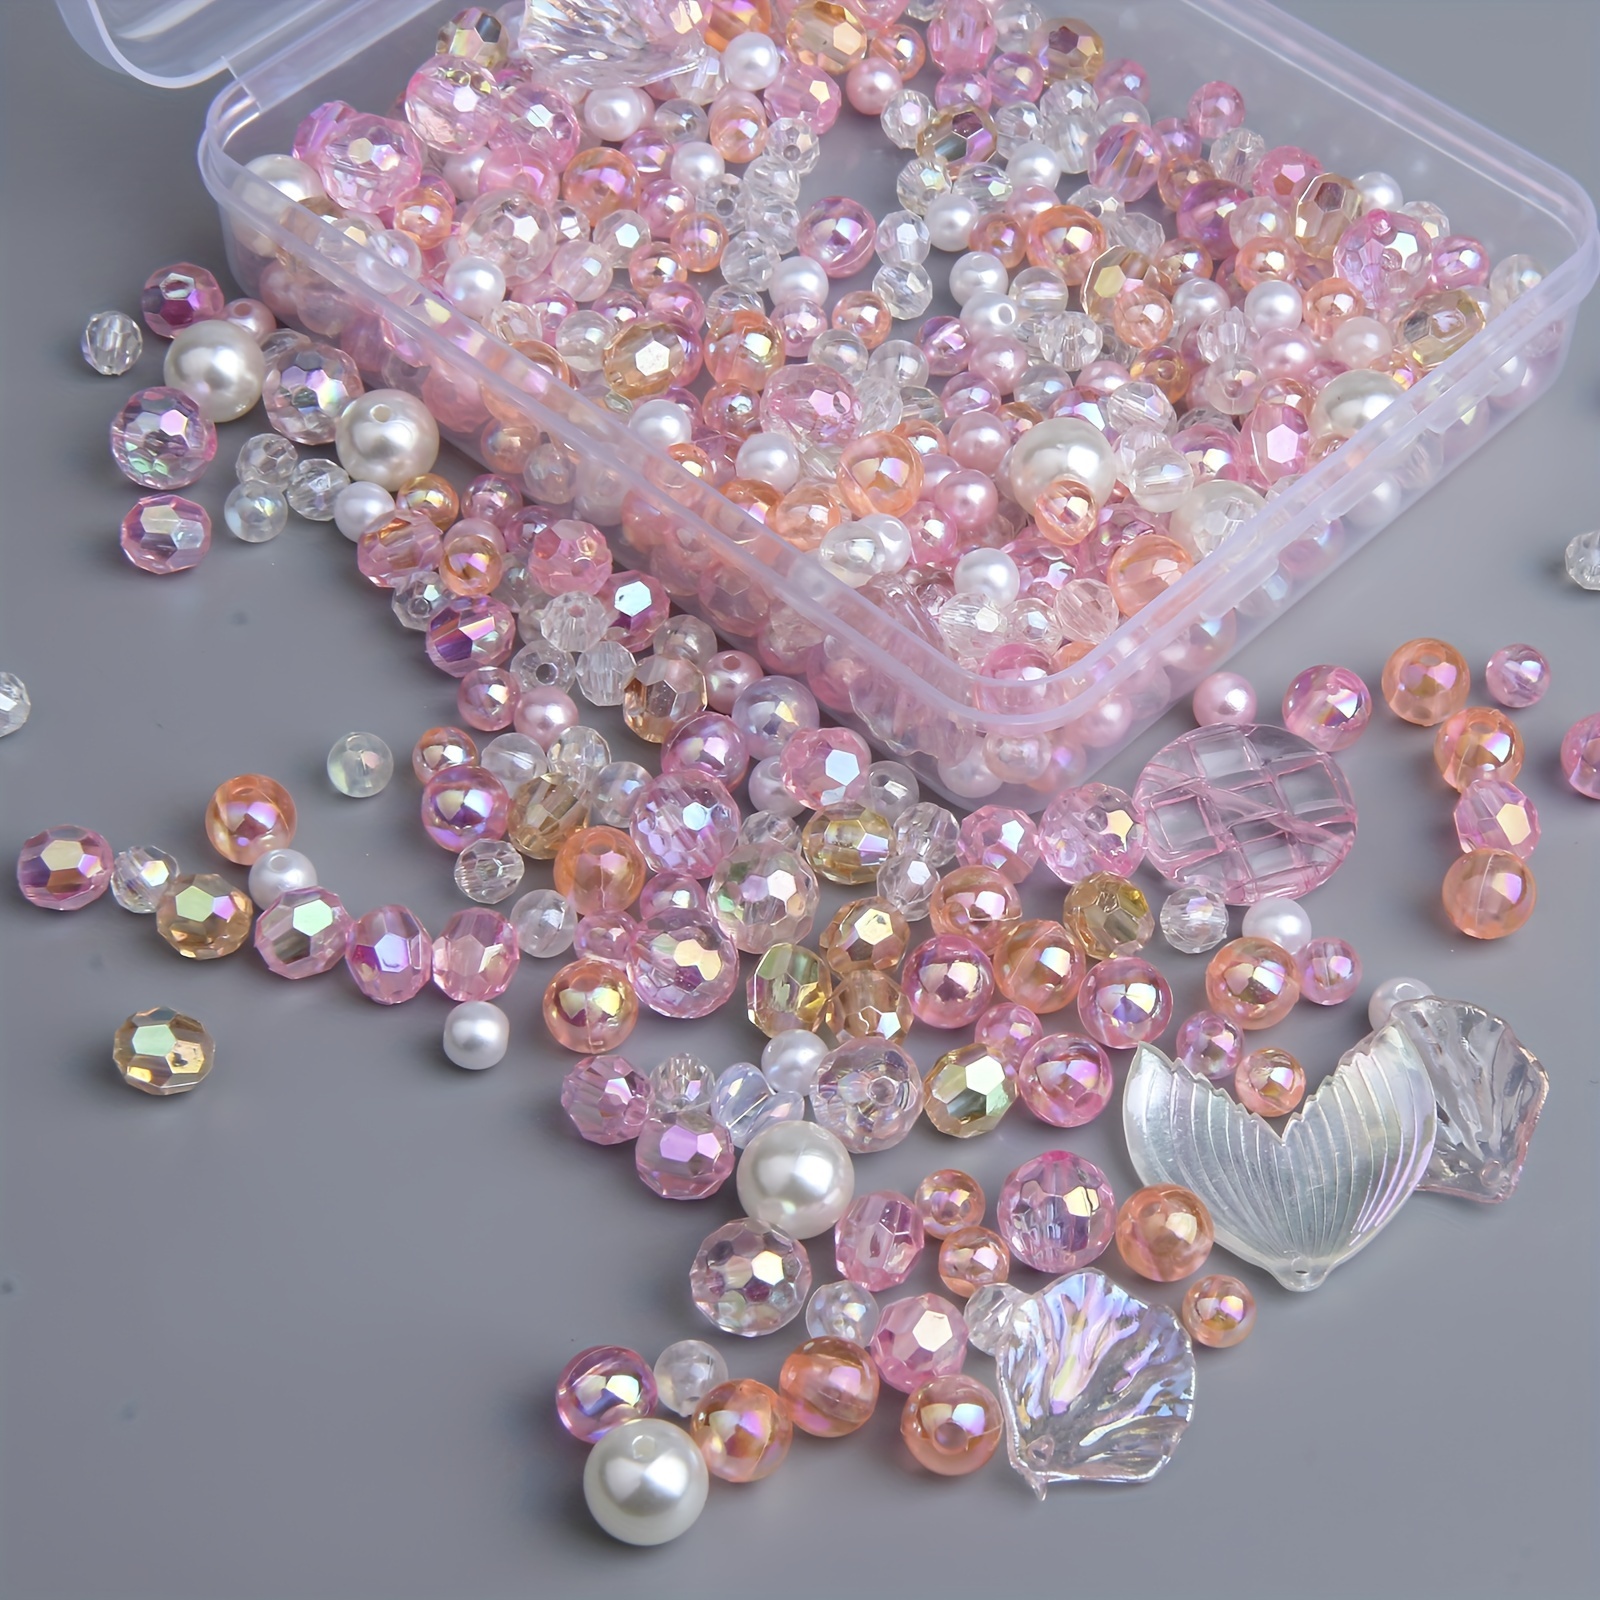 

200pcs 3-12mm Various Materials And Colors Round Mixed Beads For Jewelry Making Diy Fashion Couple Bracelets Necklace Phone Bag Chain Craft Supplies